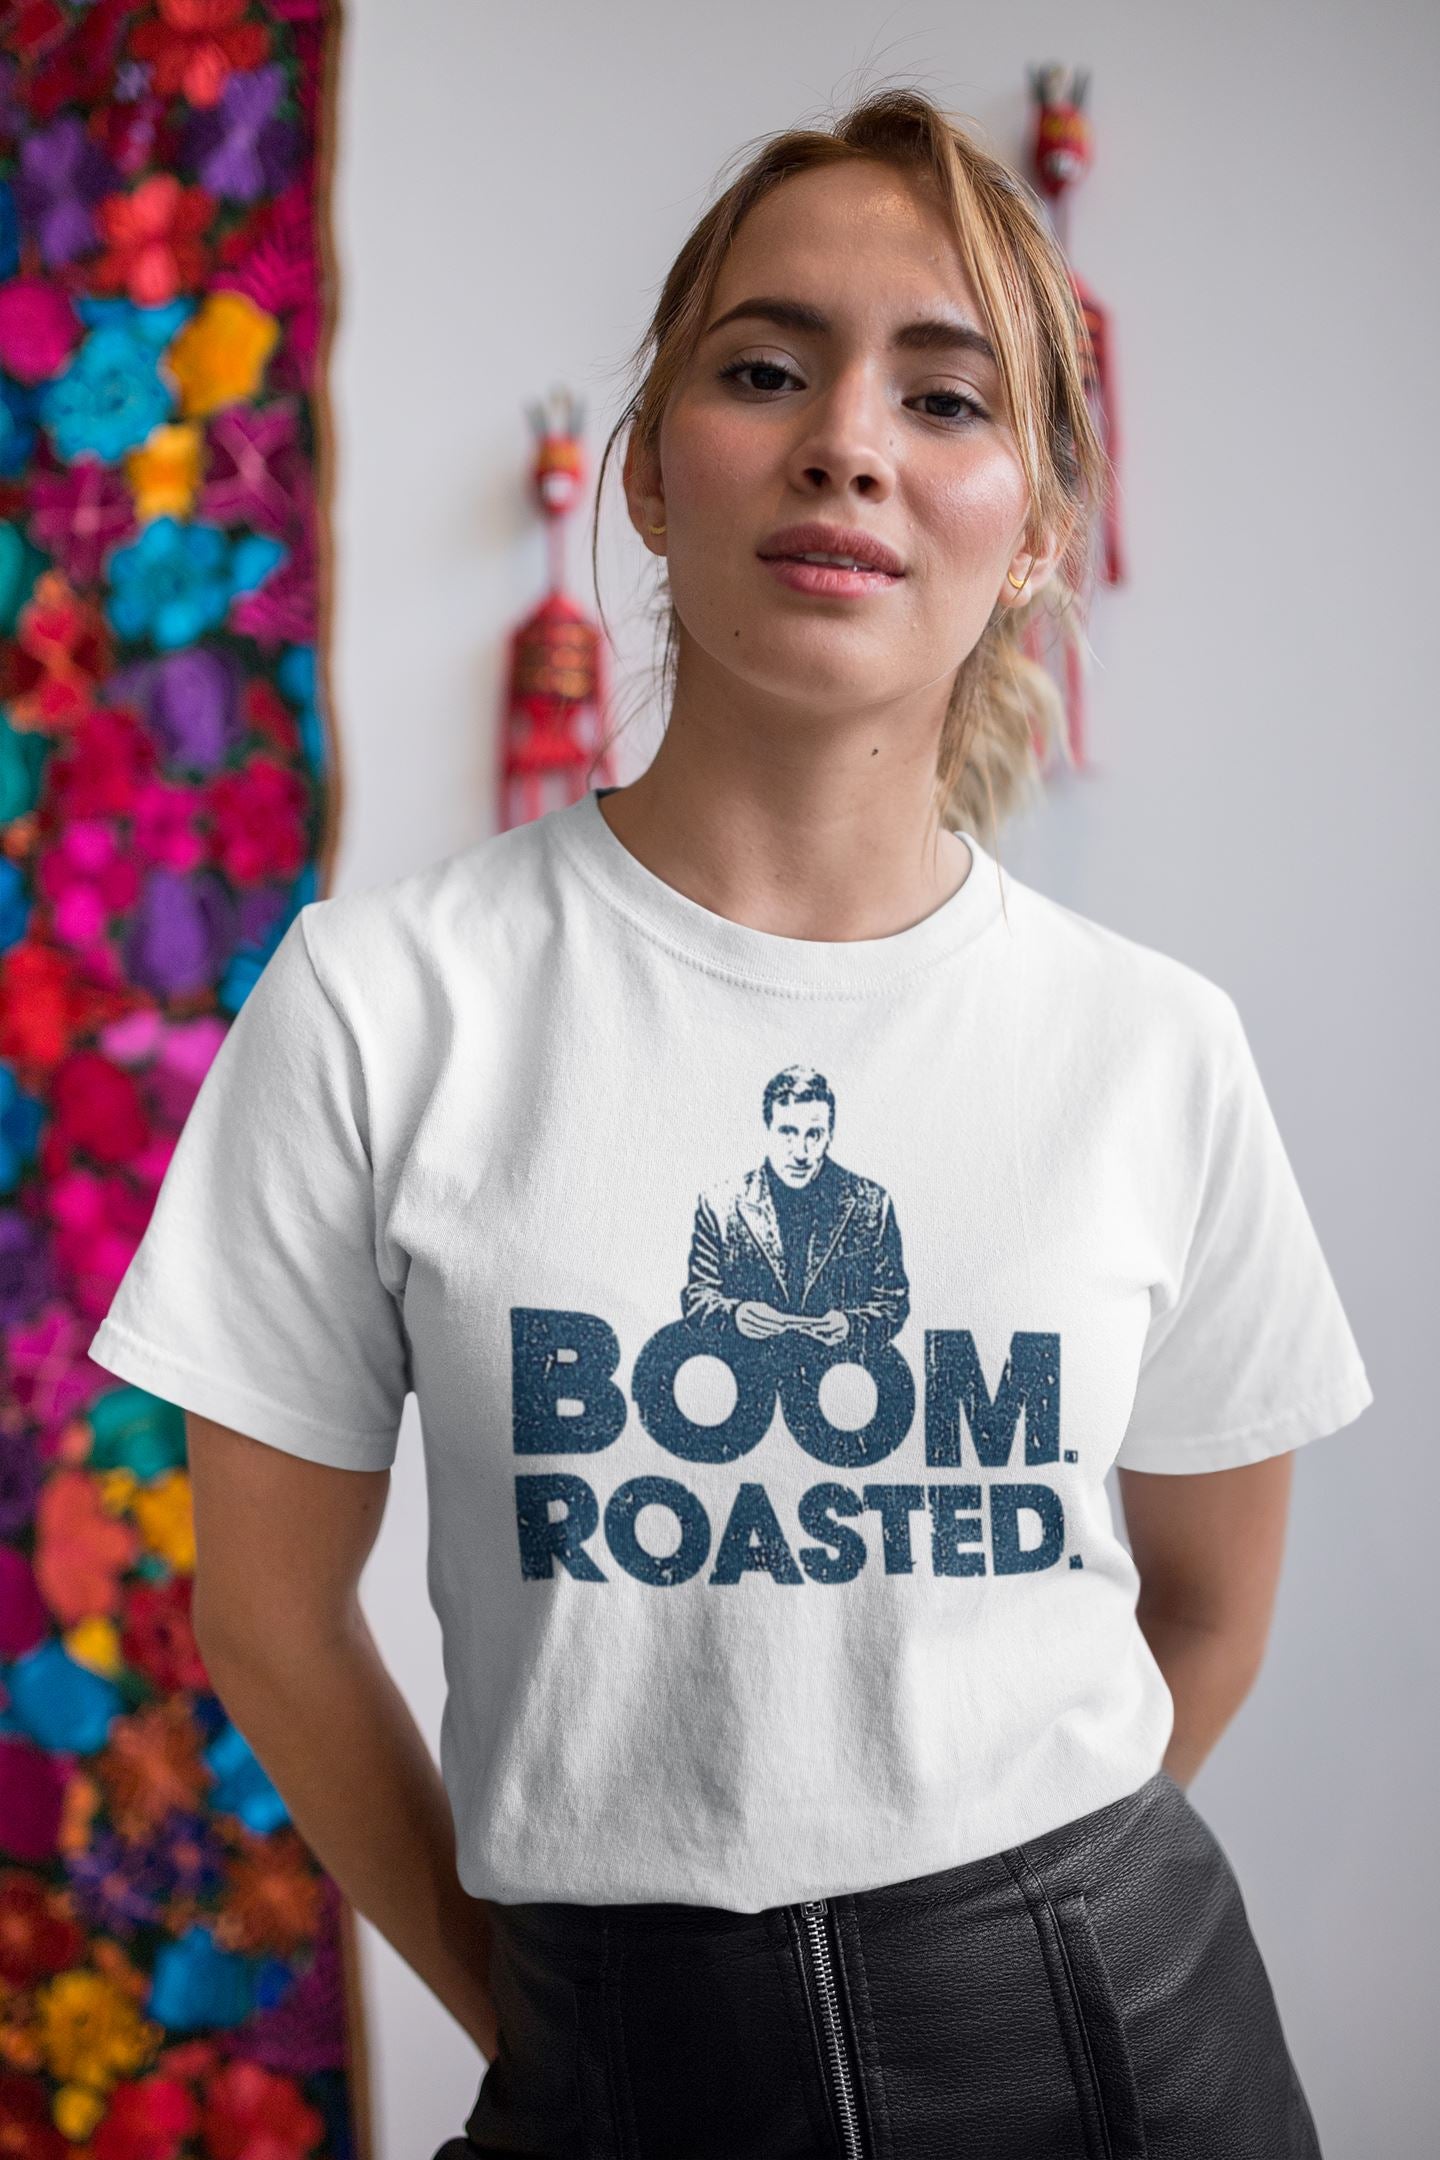 Boom Roasted Exclusive Michael Scott T Shirt for Men and Women freeshipping - Catch My Drift India